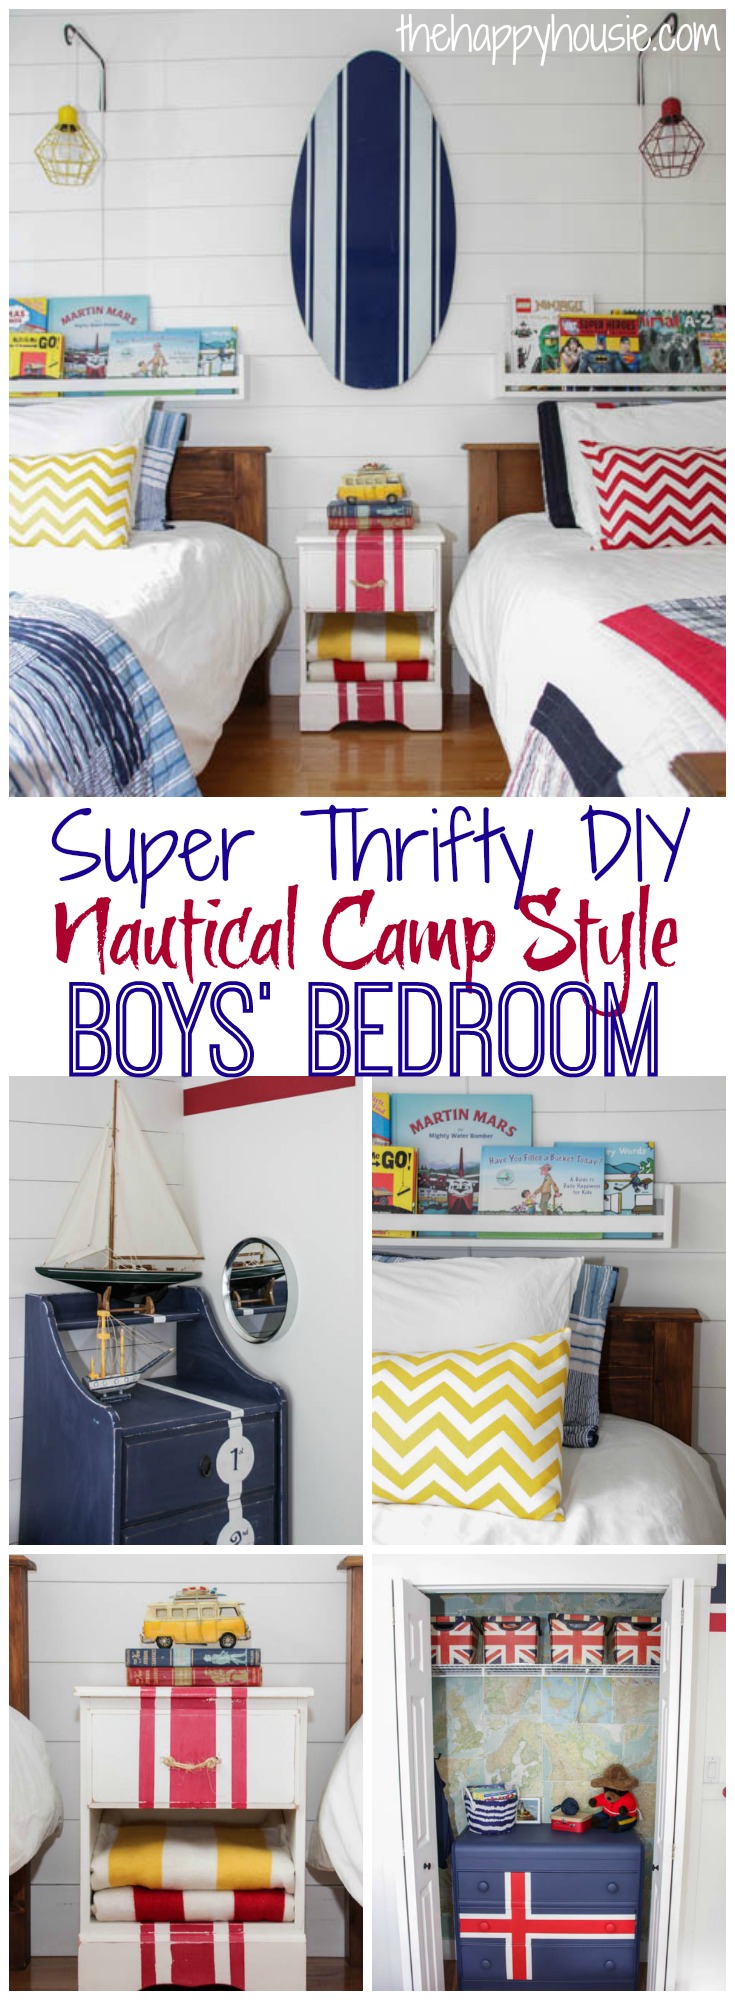 This adorable boys bedroom reveal is full of thrifty DIY ideas for creating a nautical camp style boys bedroom